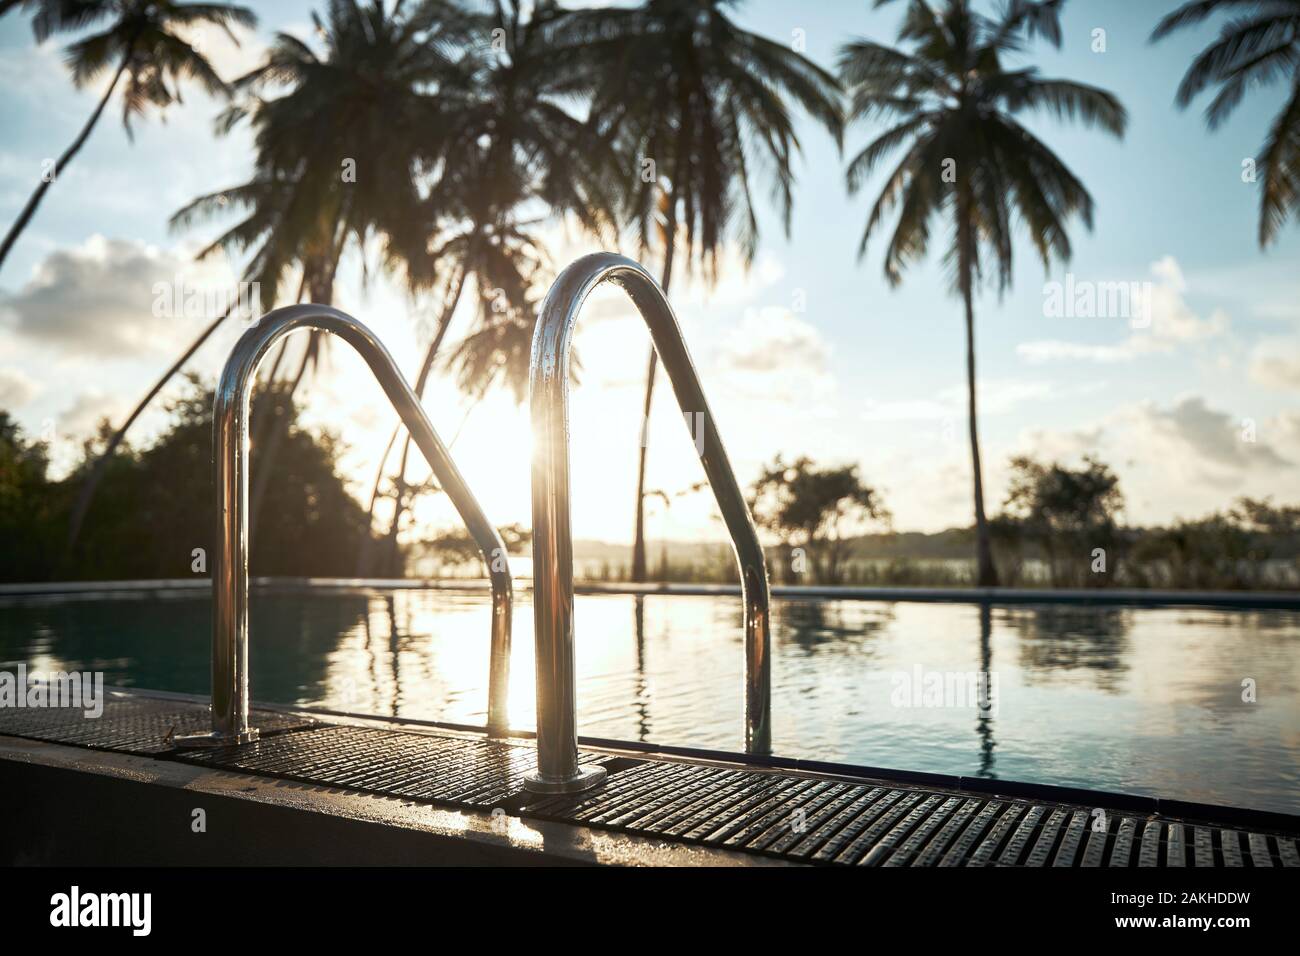 Relaxation in tourist resort. Swimming pool in the middle of coconut palm trees against lagoon at sunset. Stock Photo